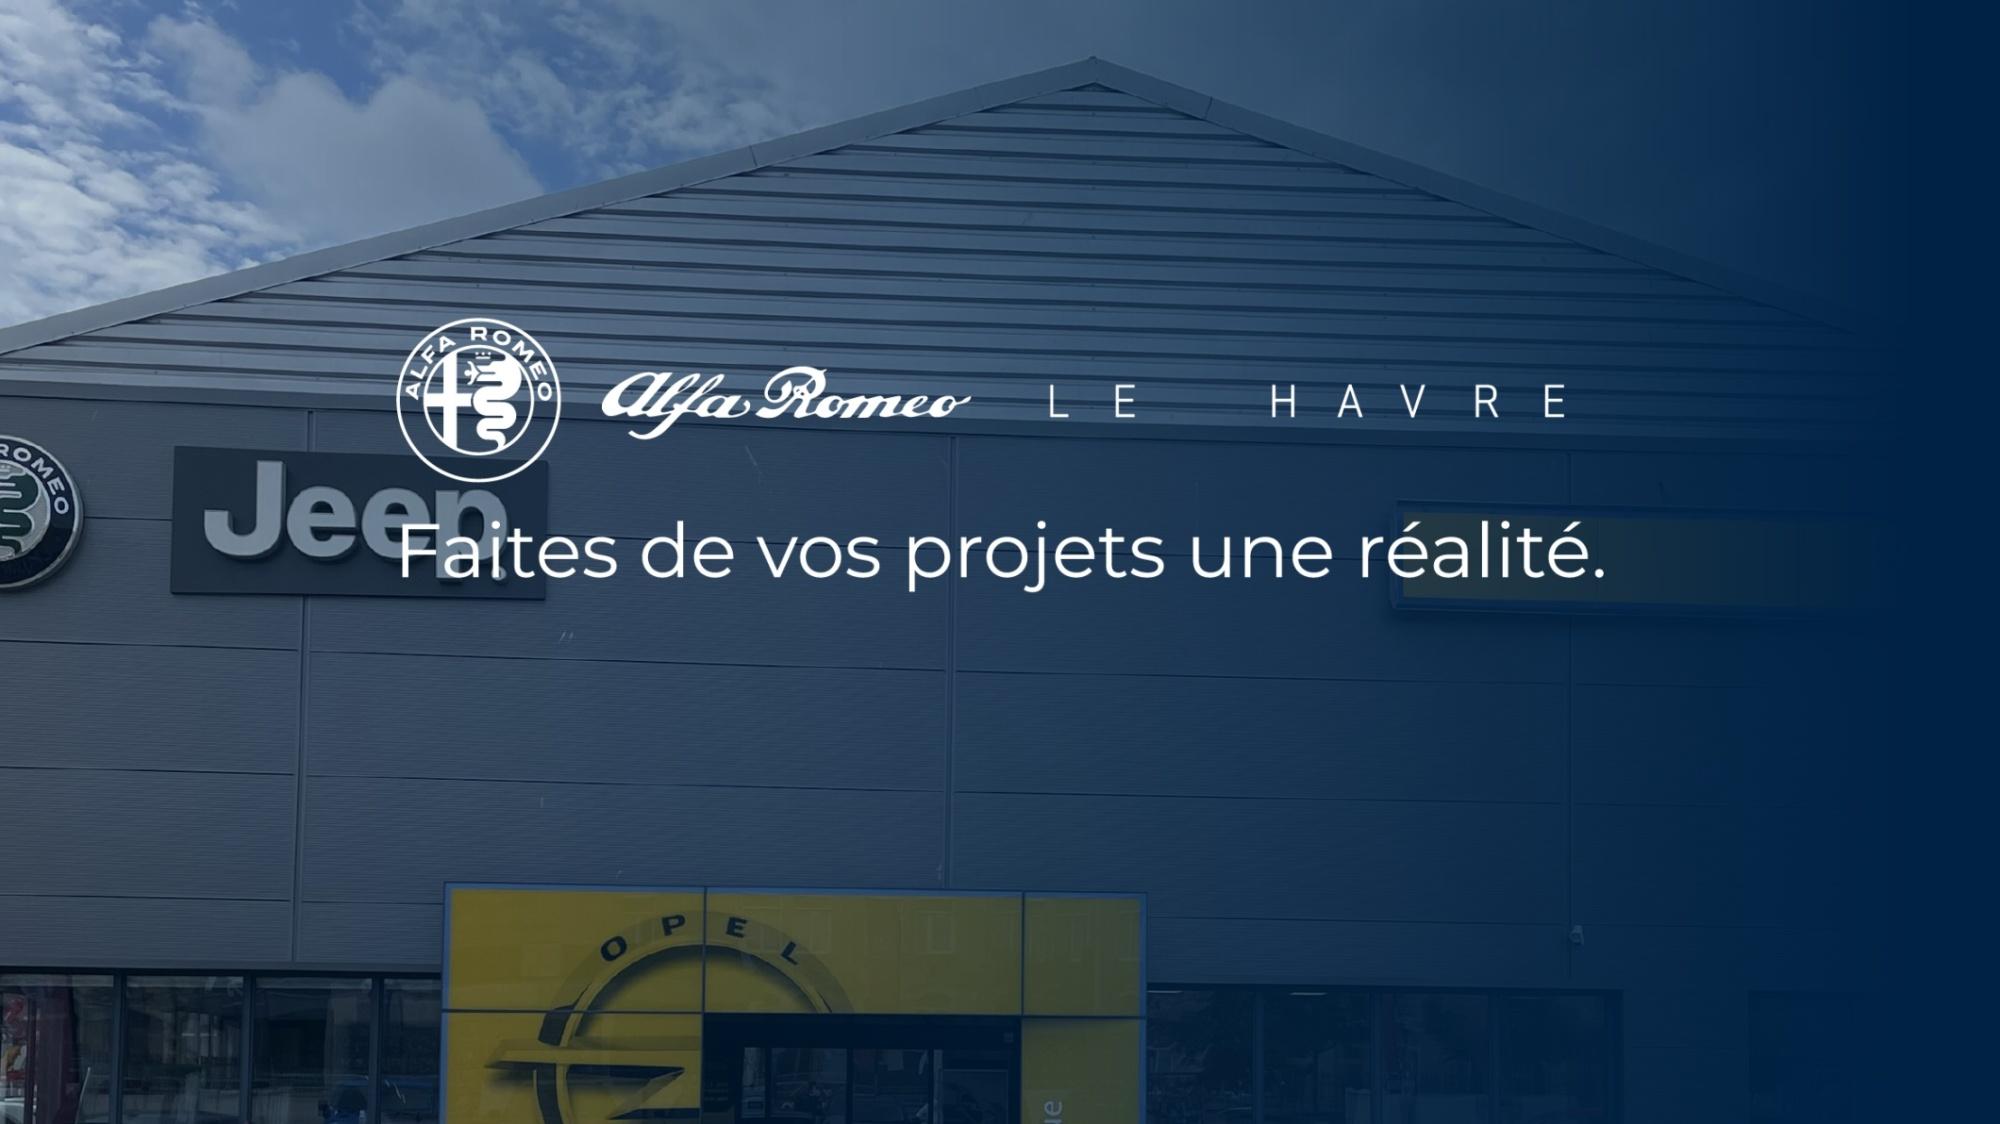 Groupe Legrand Le Havre